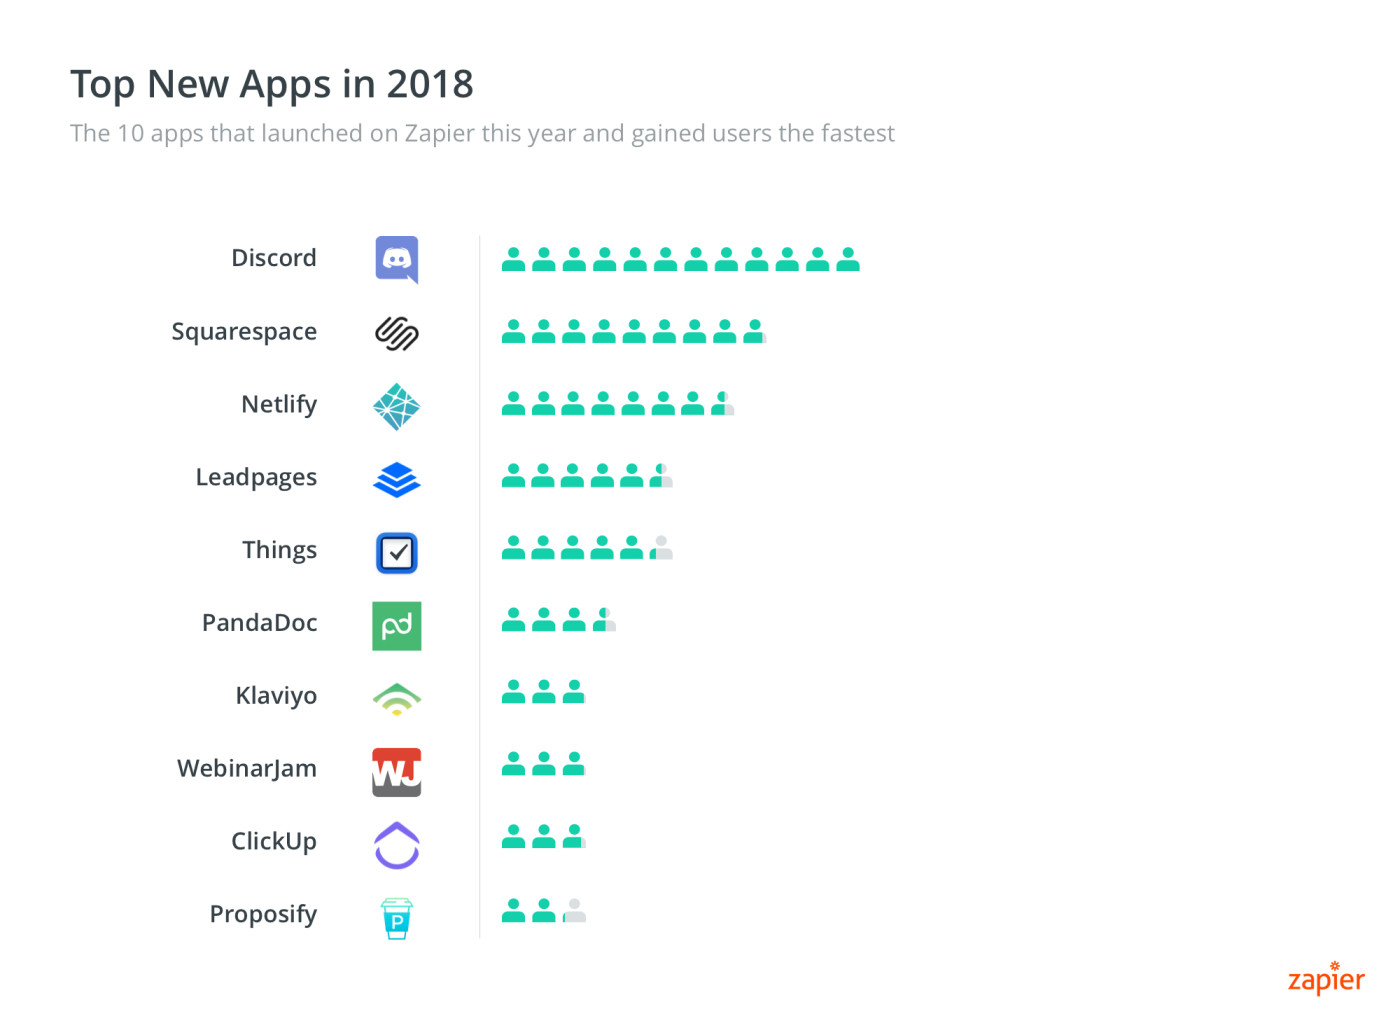 Fastest Growing New Apps 2018